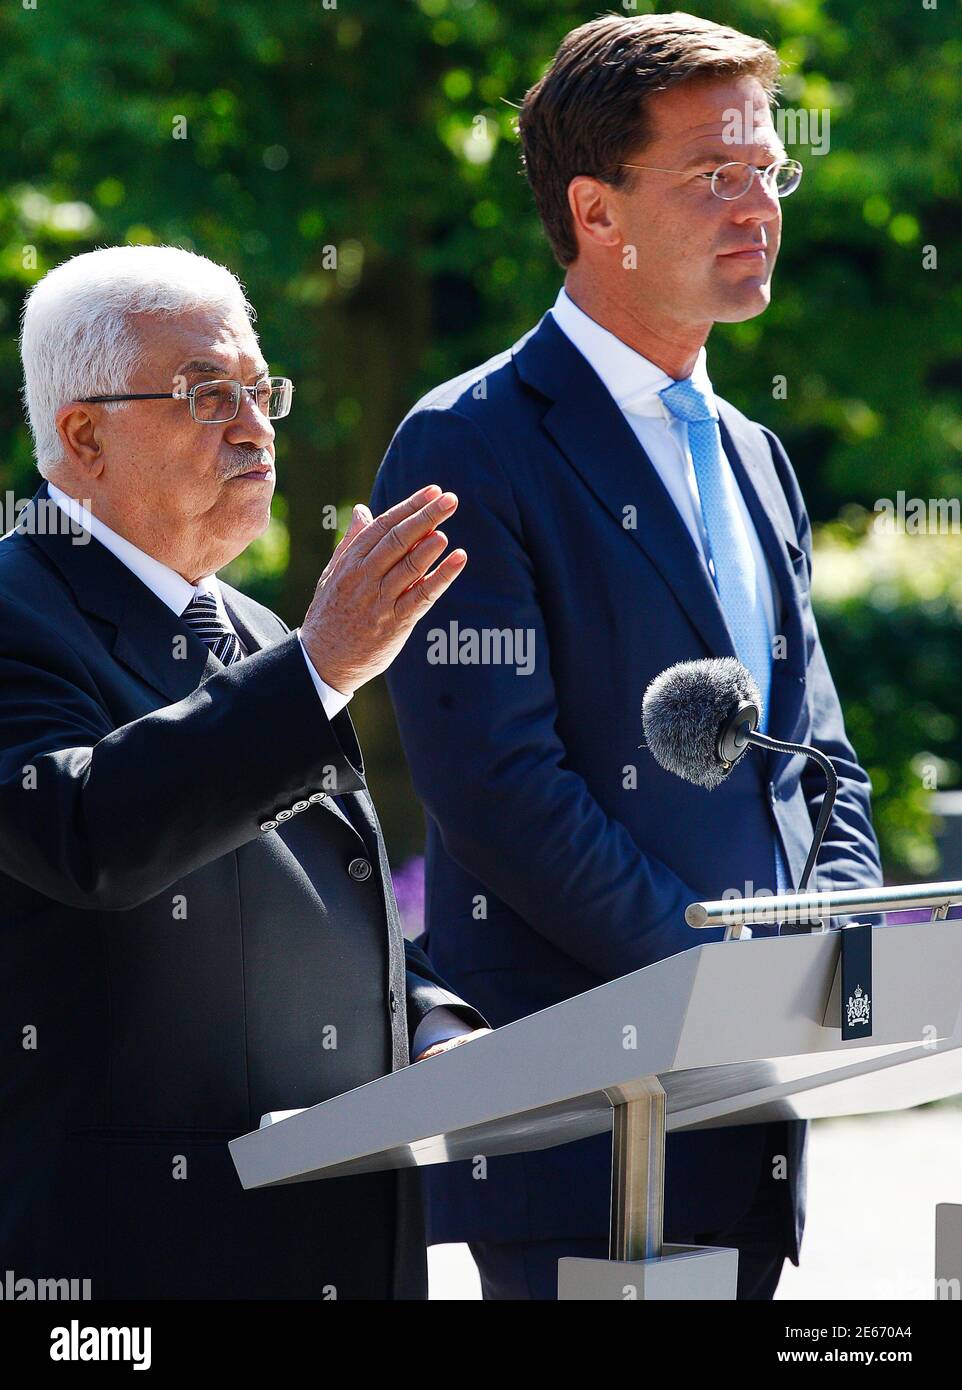 Netherlands' Prime Minister Mark Rutte (R) and Palestinian President  Mahmoud Abbas give a joint news conference at the official working  residence "Het Catshuis", in The Hague June 30, 2011. REUTERS/Jerry Lampen  (NETHERLANDS -